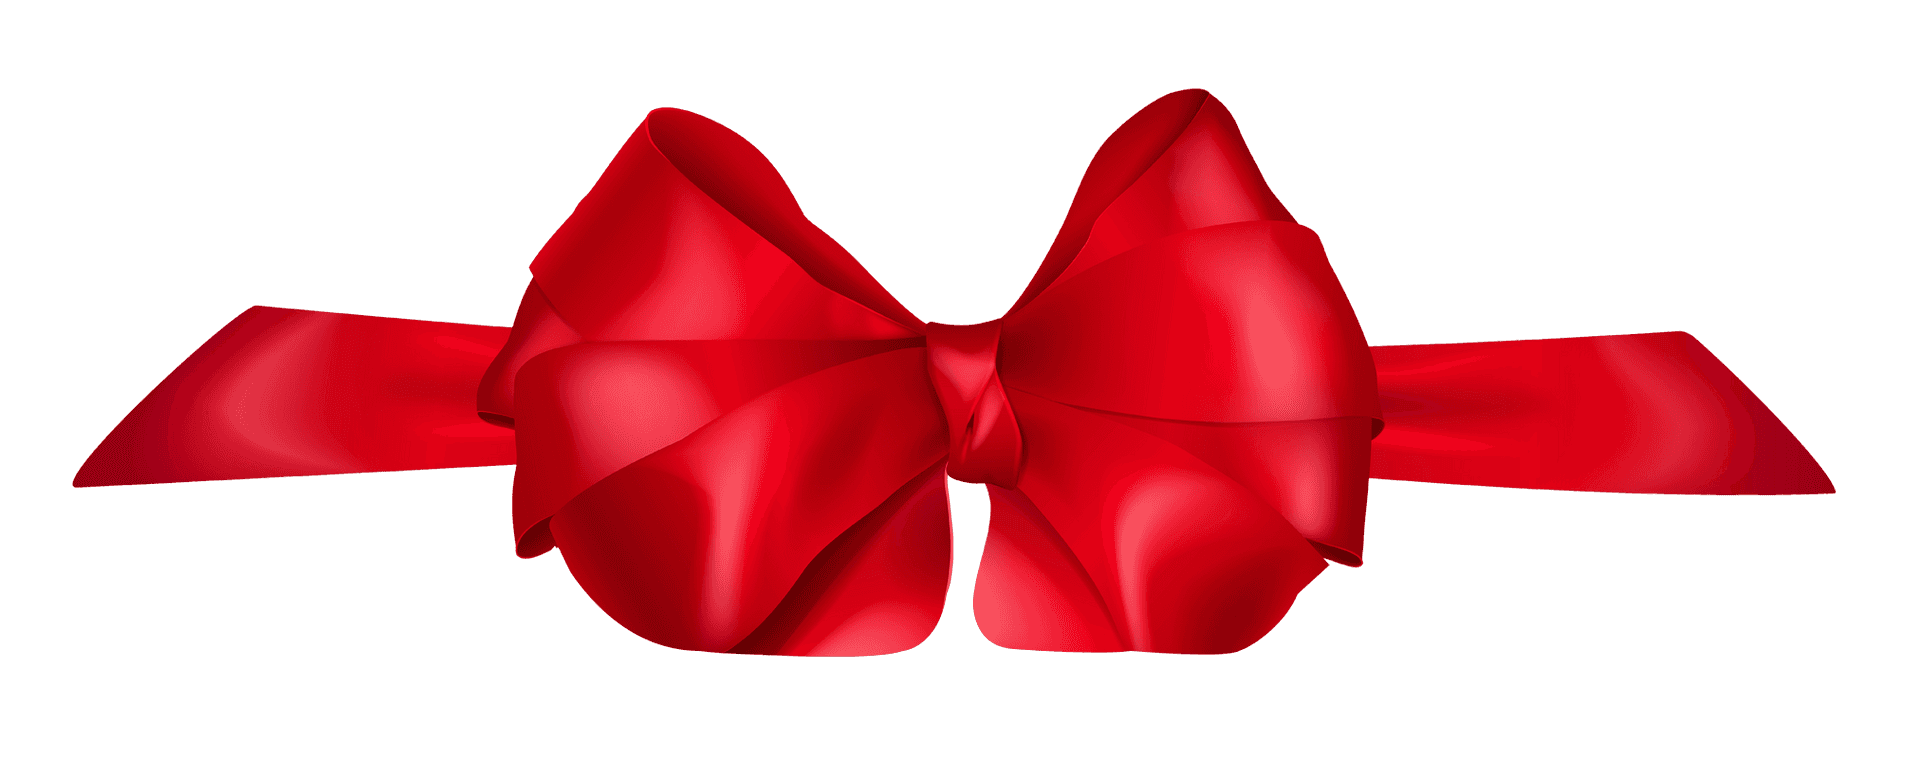 Red Satin Gift Bow PNG